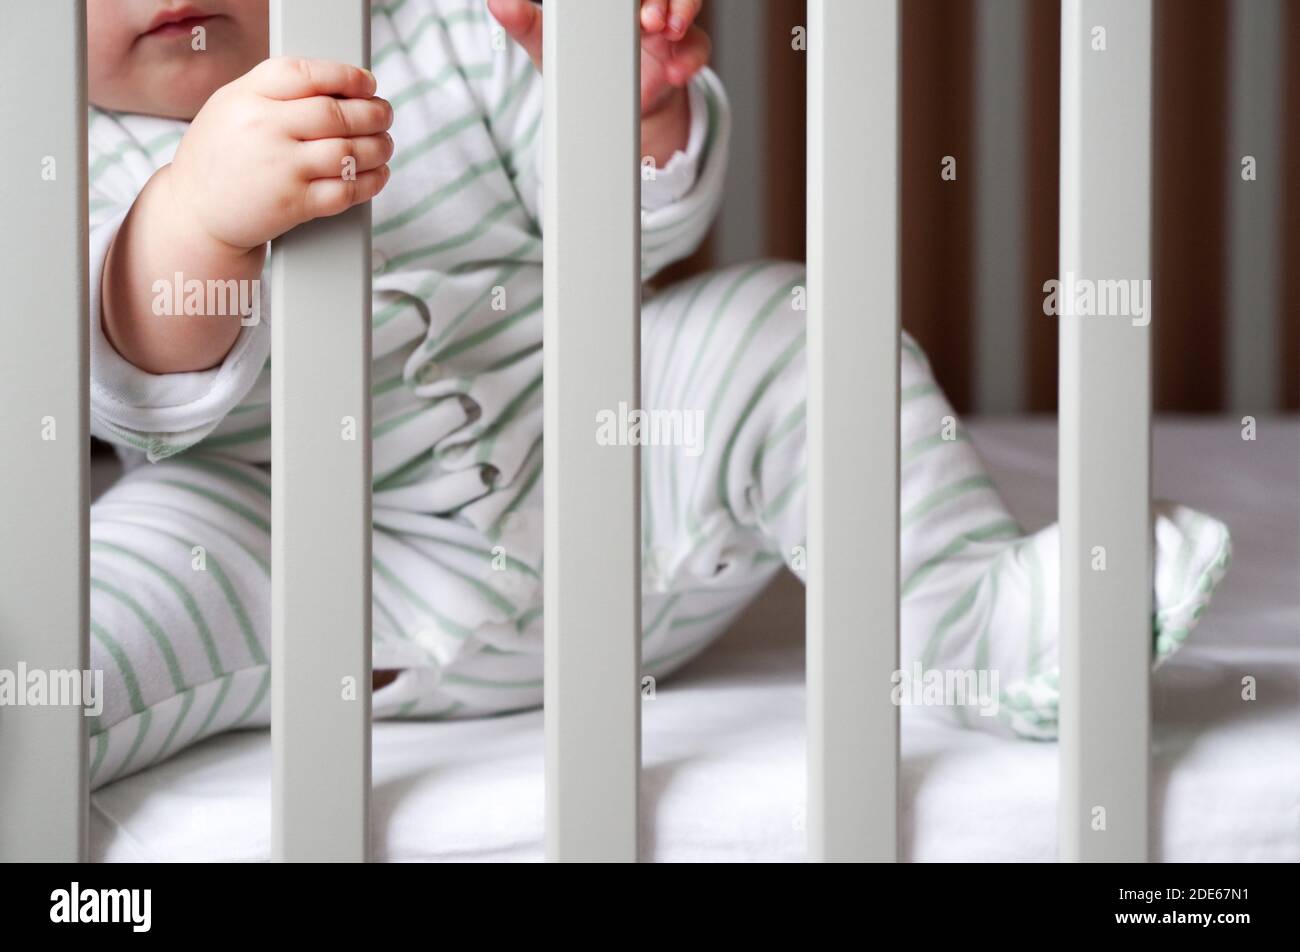 Chubby baby in a cot bed holding on to the bars Stock Photo